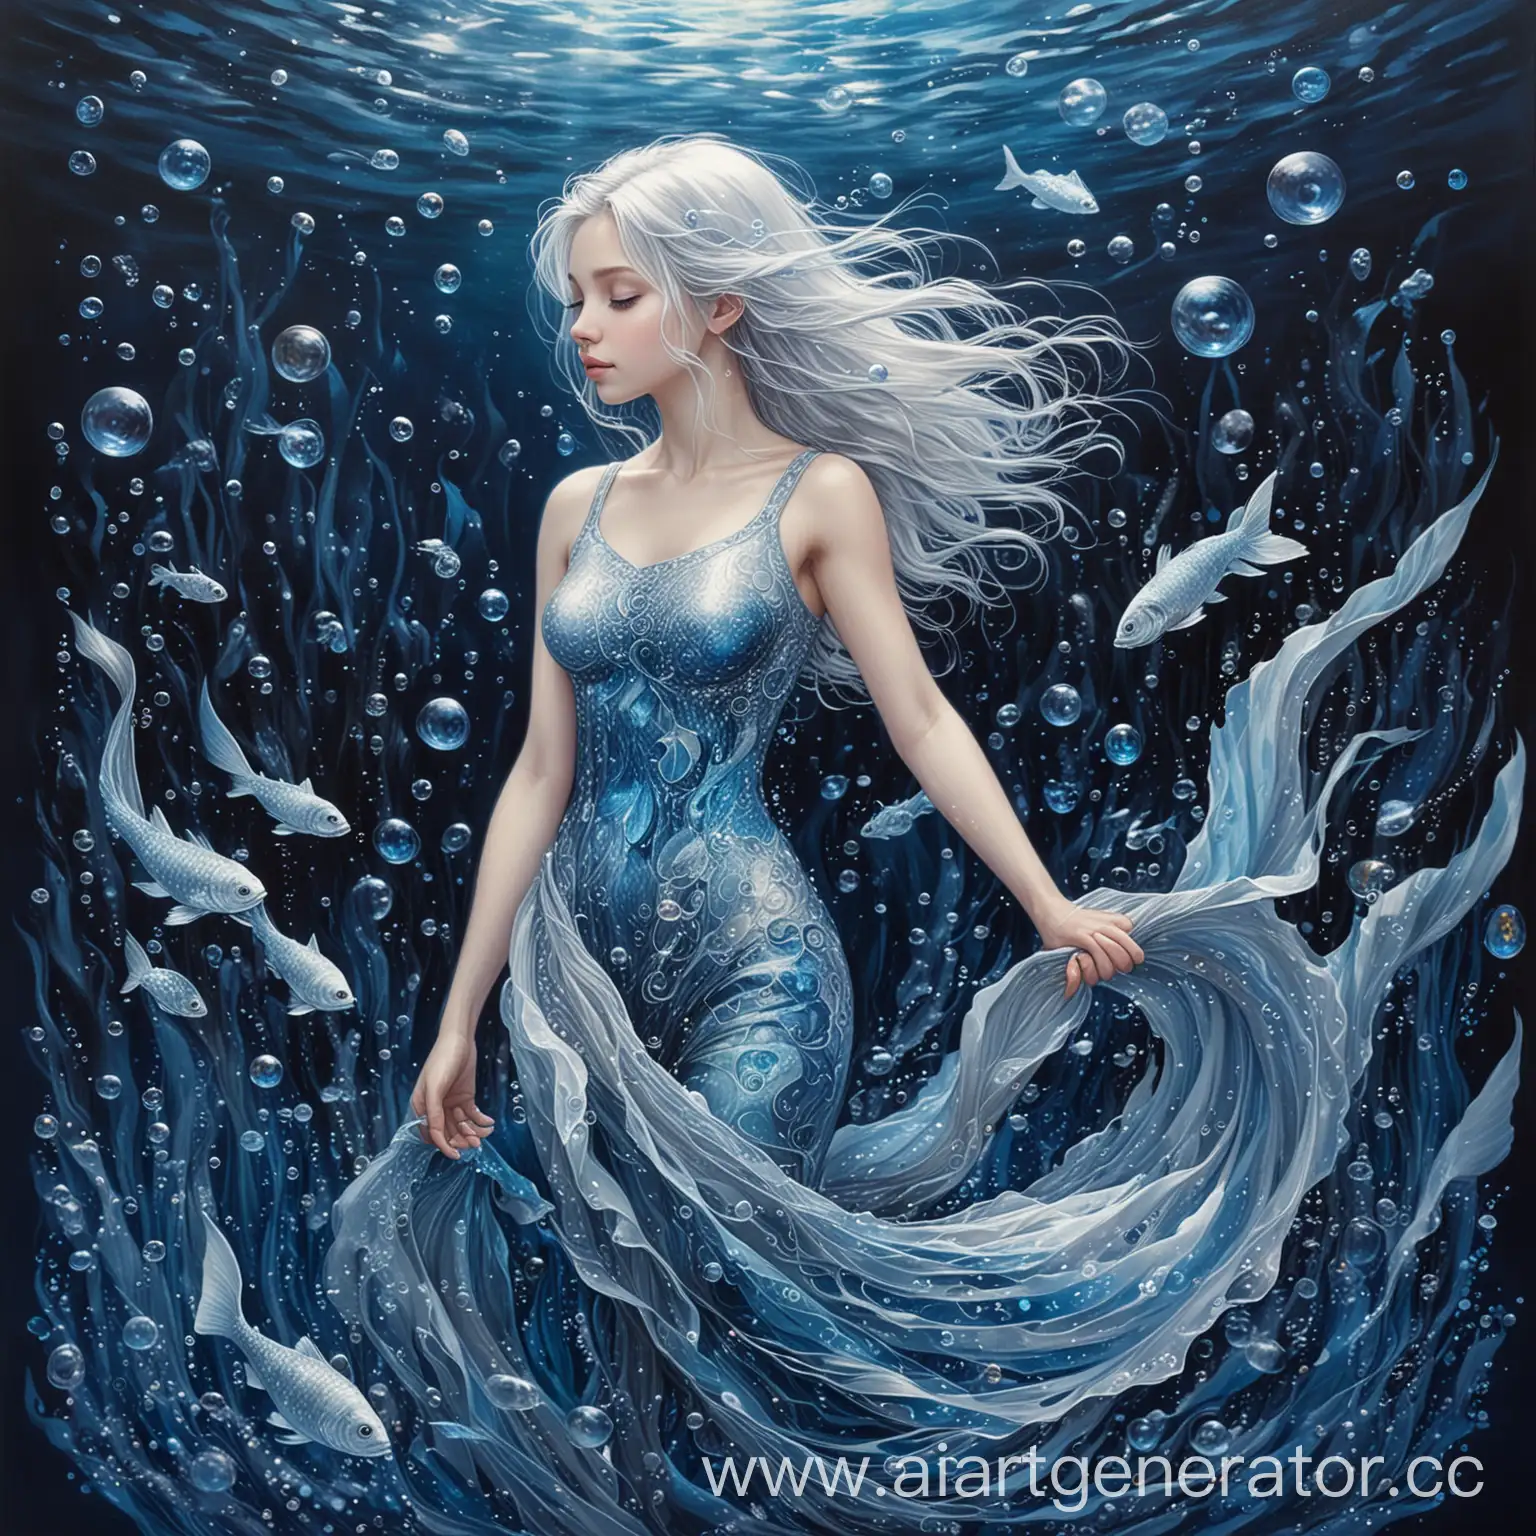 SilverHaired-Girl-Strolling-in-Deep-Blue-Dreamscape-with-Fish-Tail-and-Bubbles